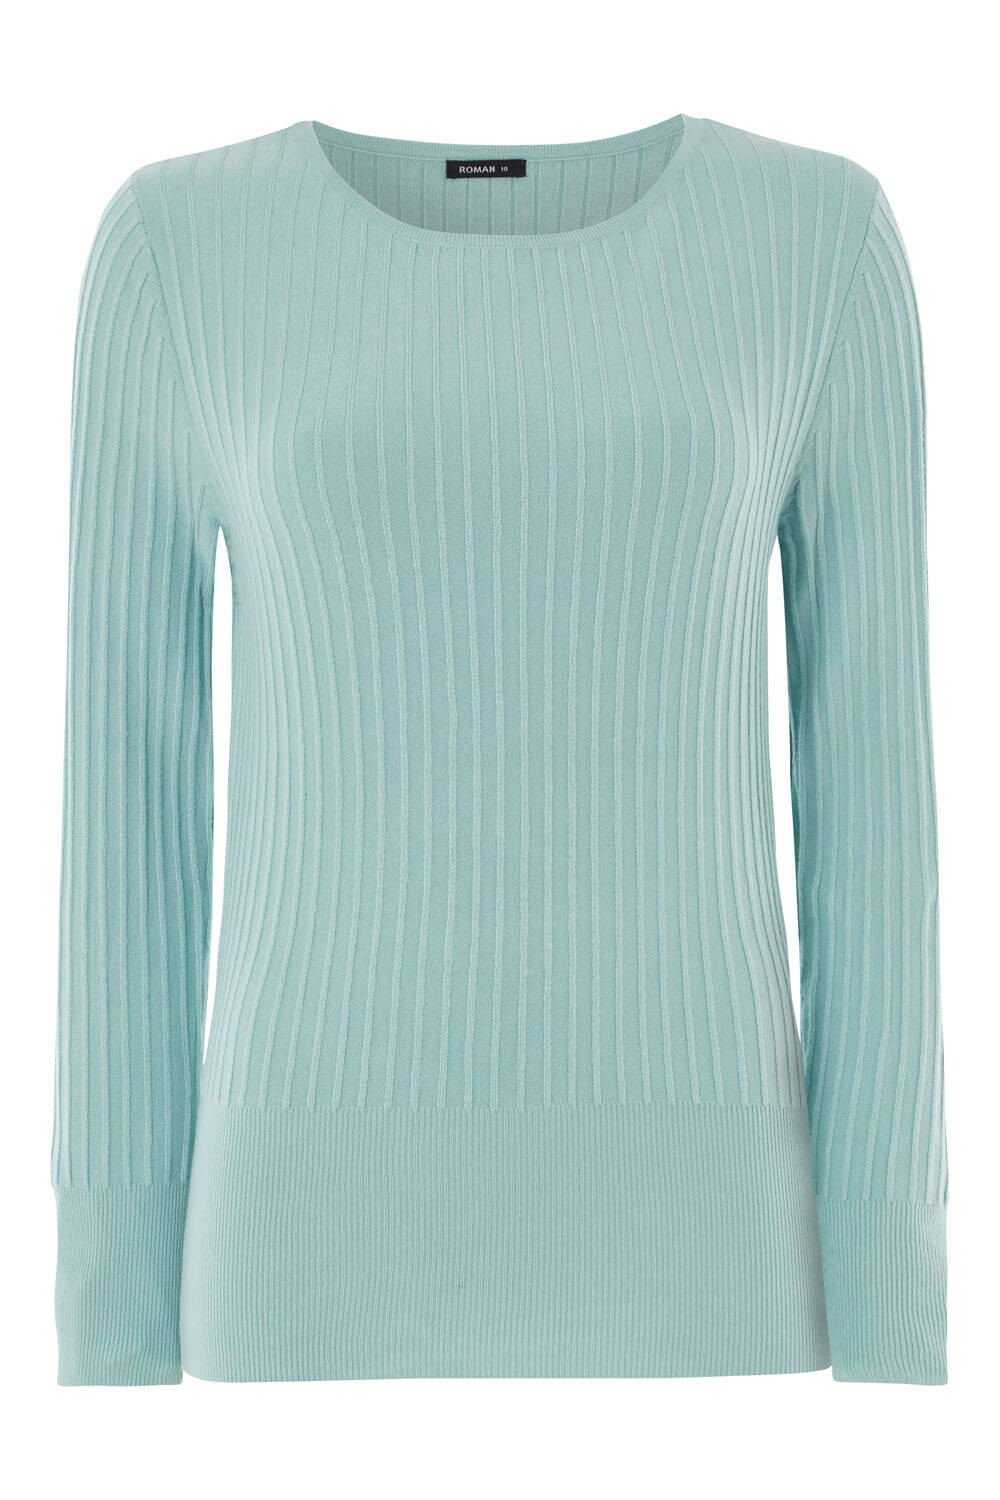 Mint Ribbed Textured Jumper, Image 5 of 5